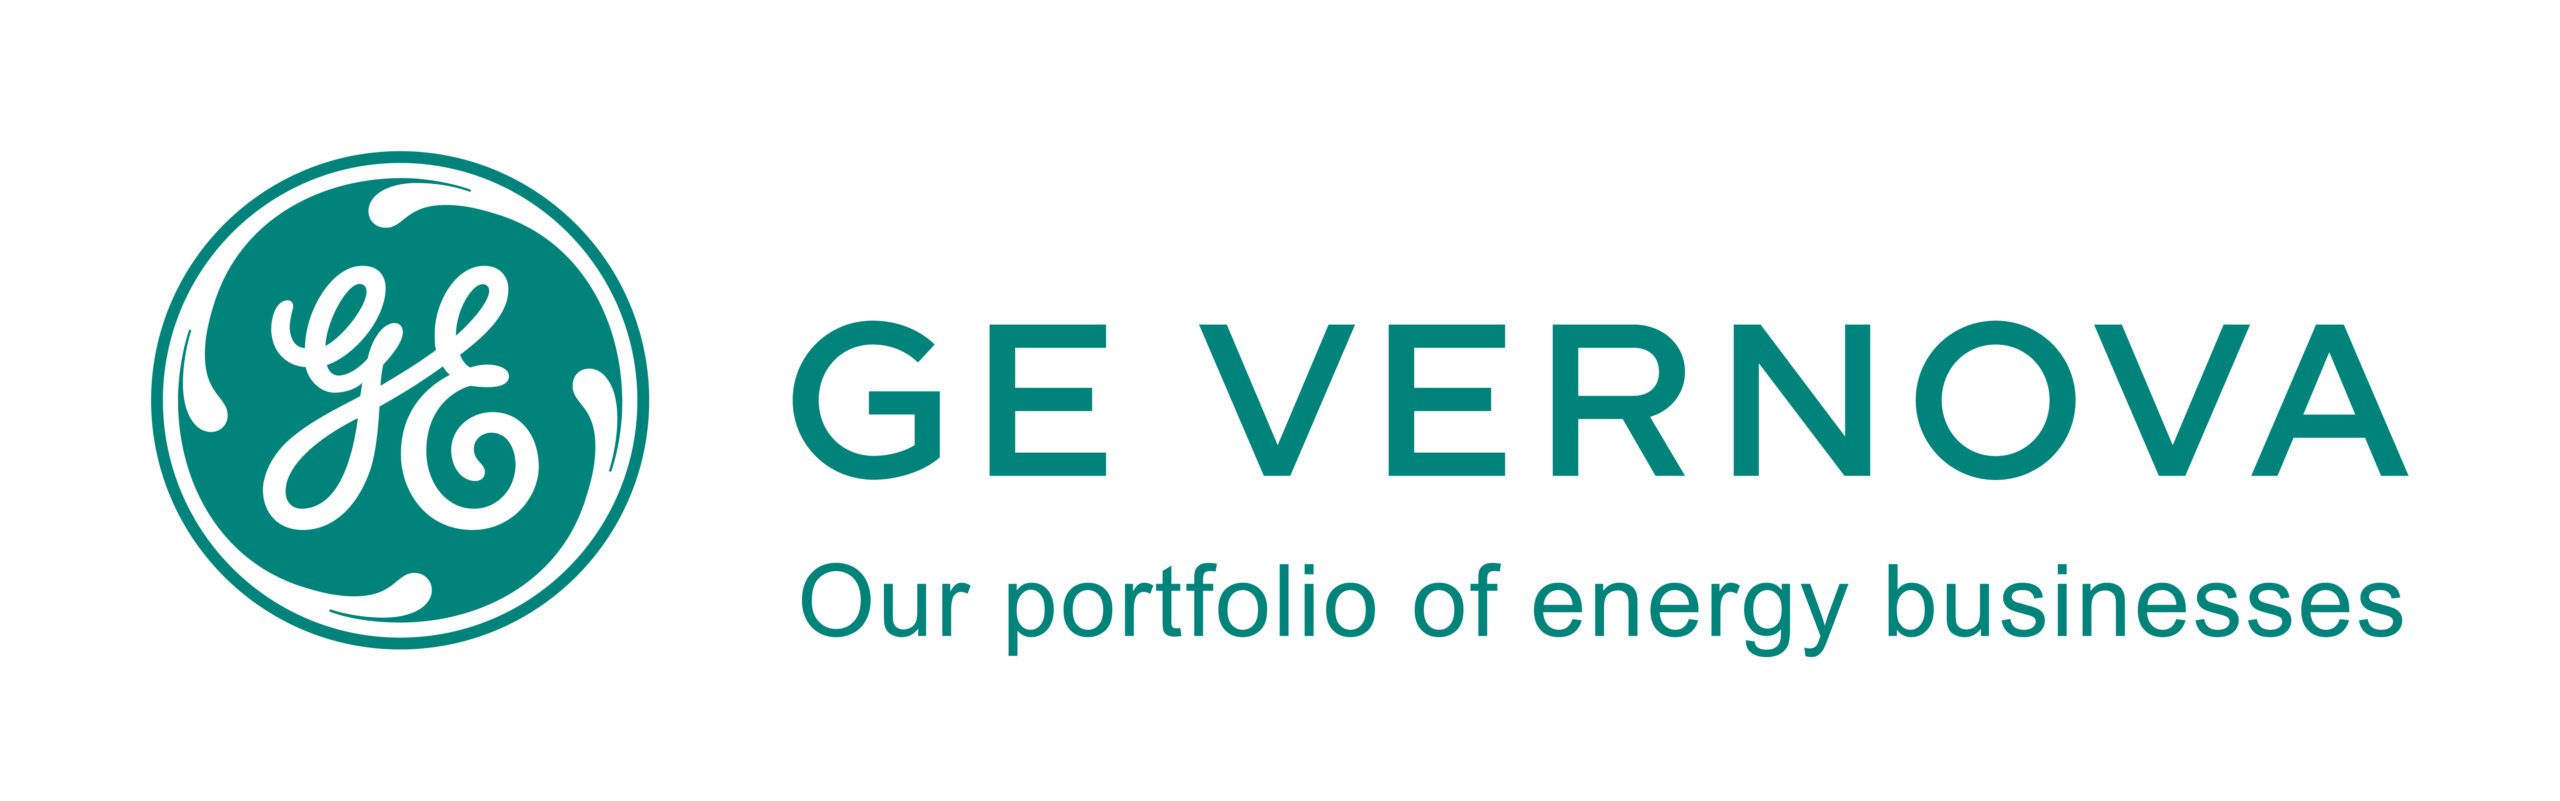 GE’s Energy Business Will Have a New Name—Vernova